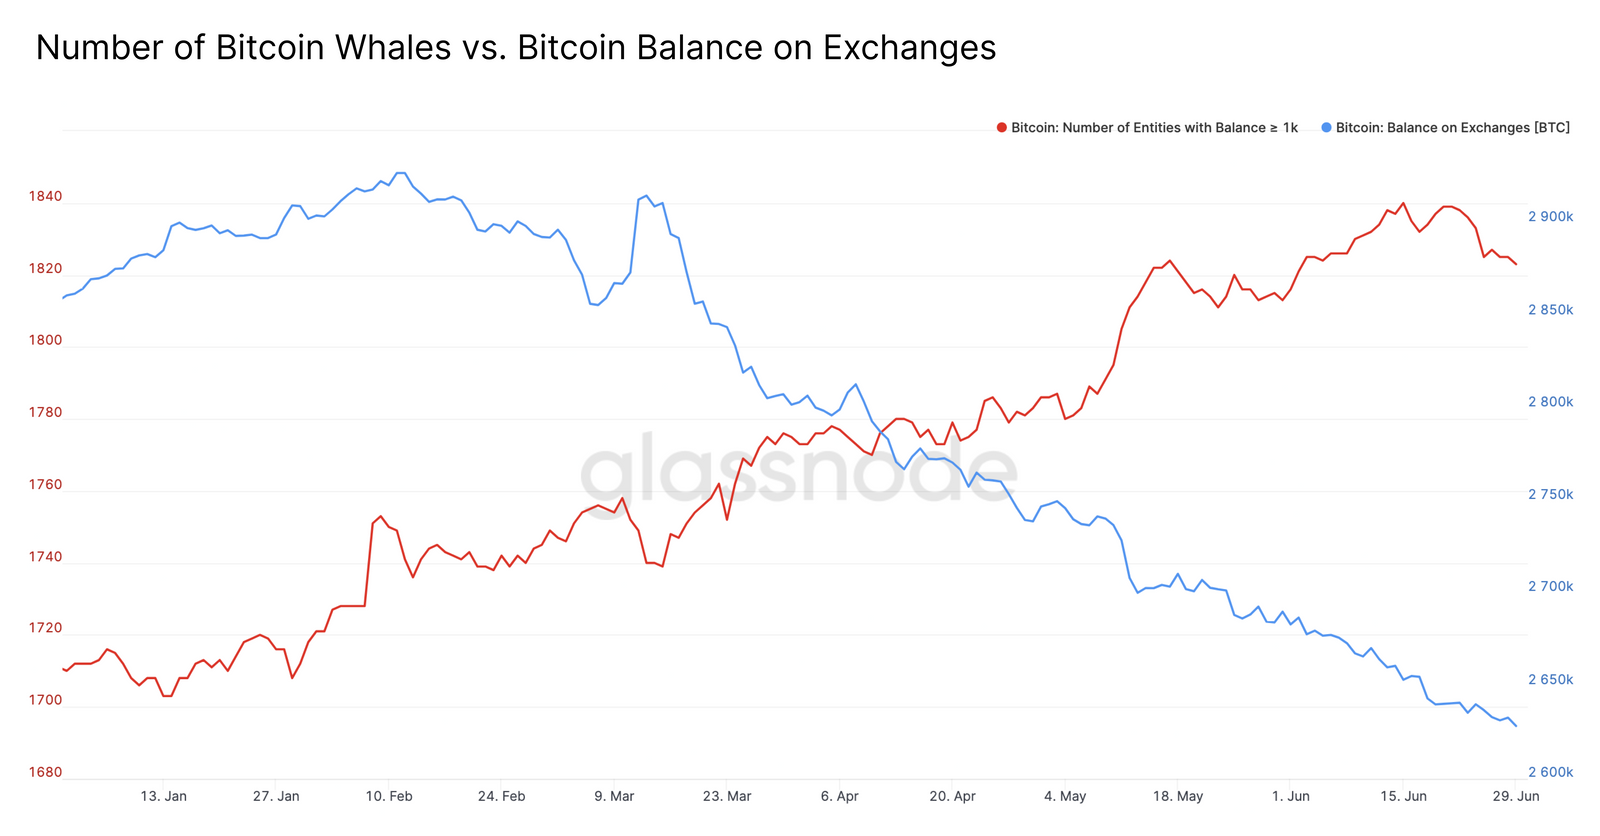 7_whale_numbers_vs_balance_on_exchanges